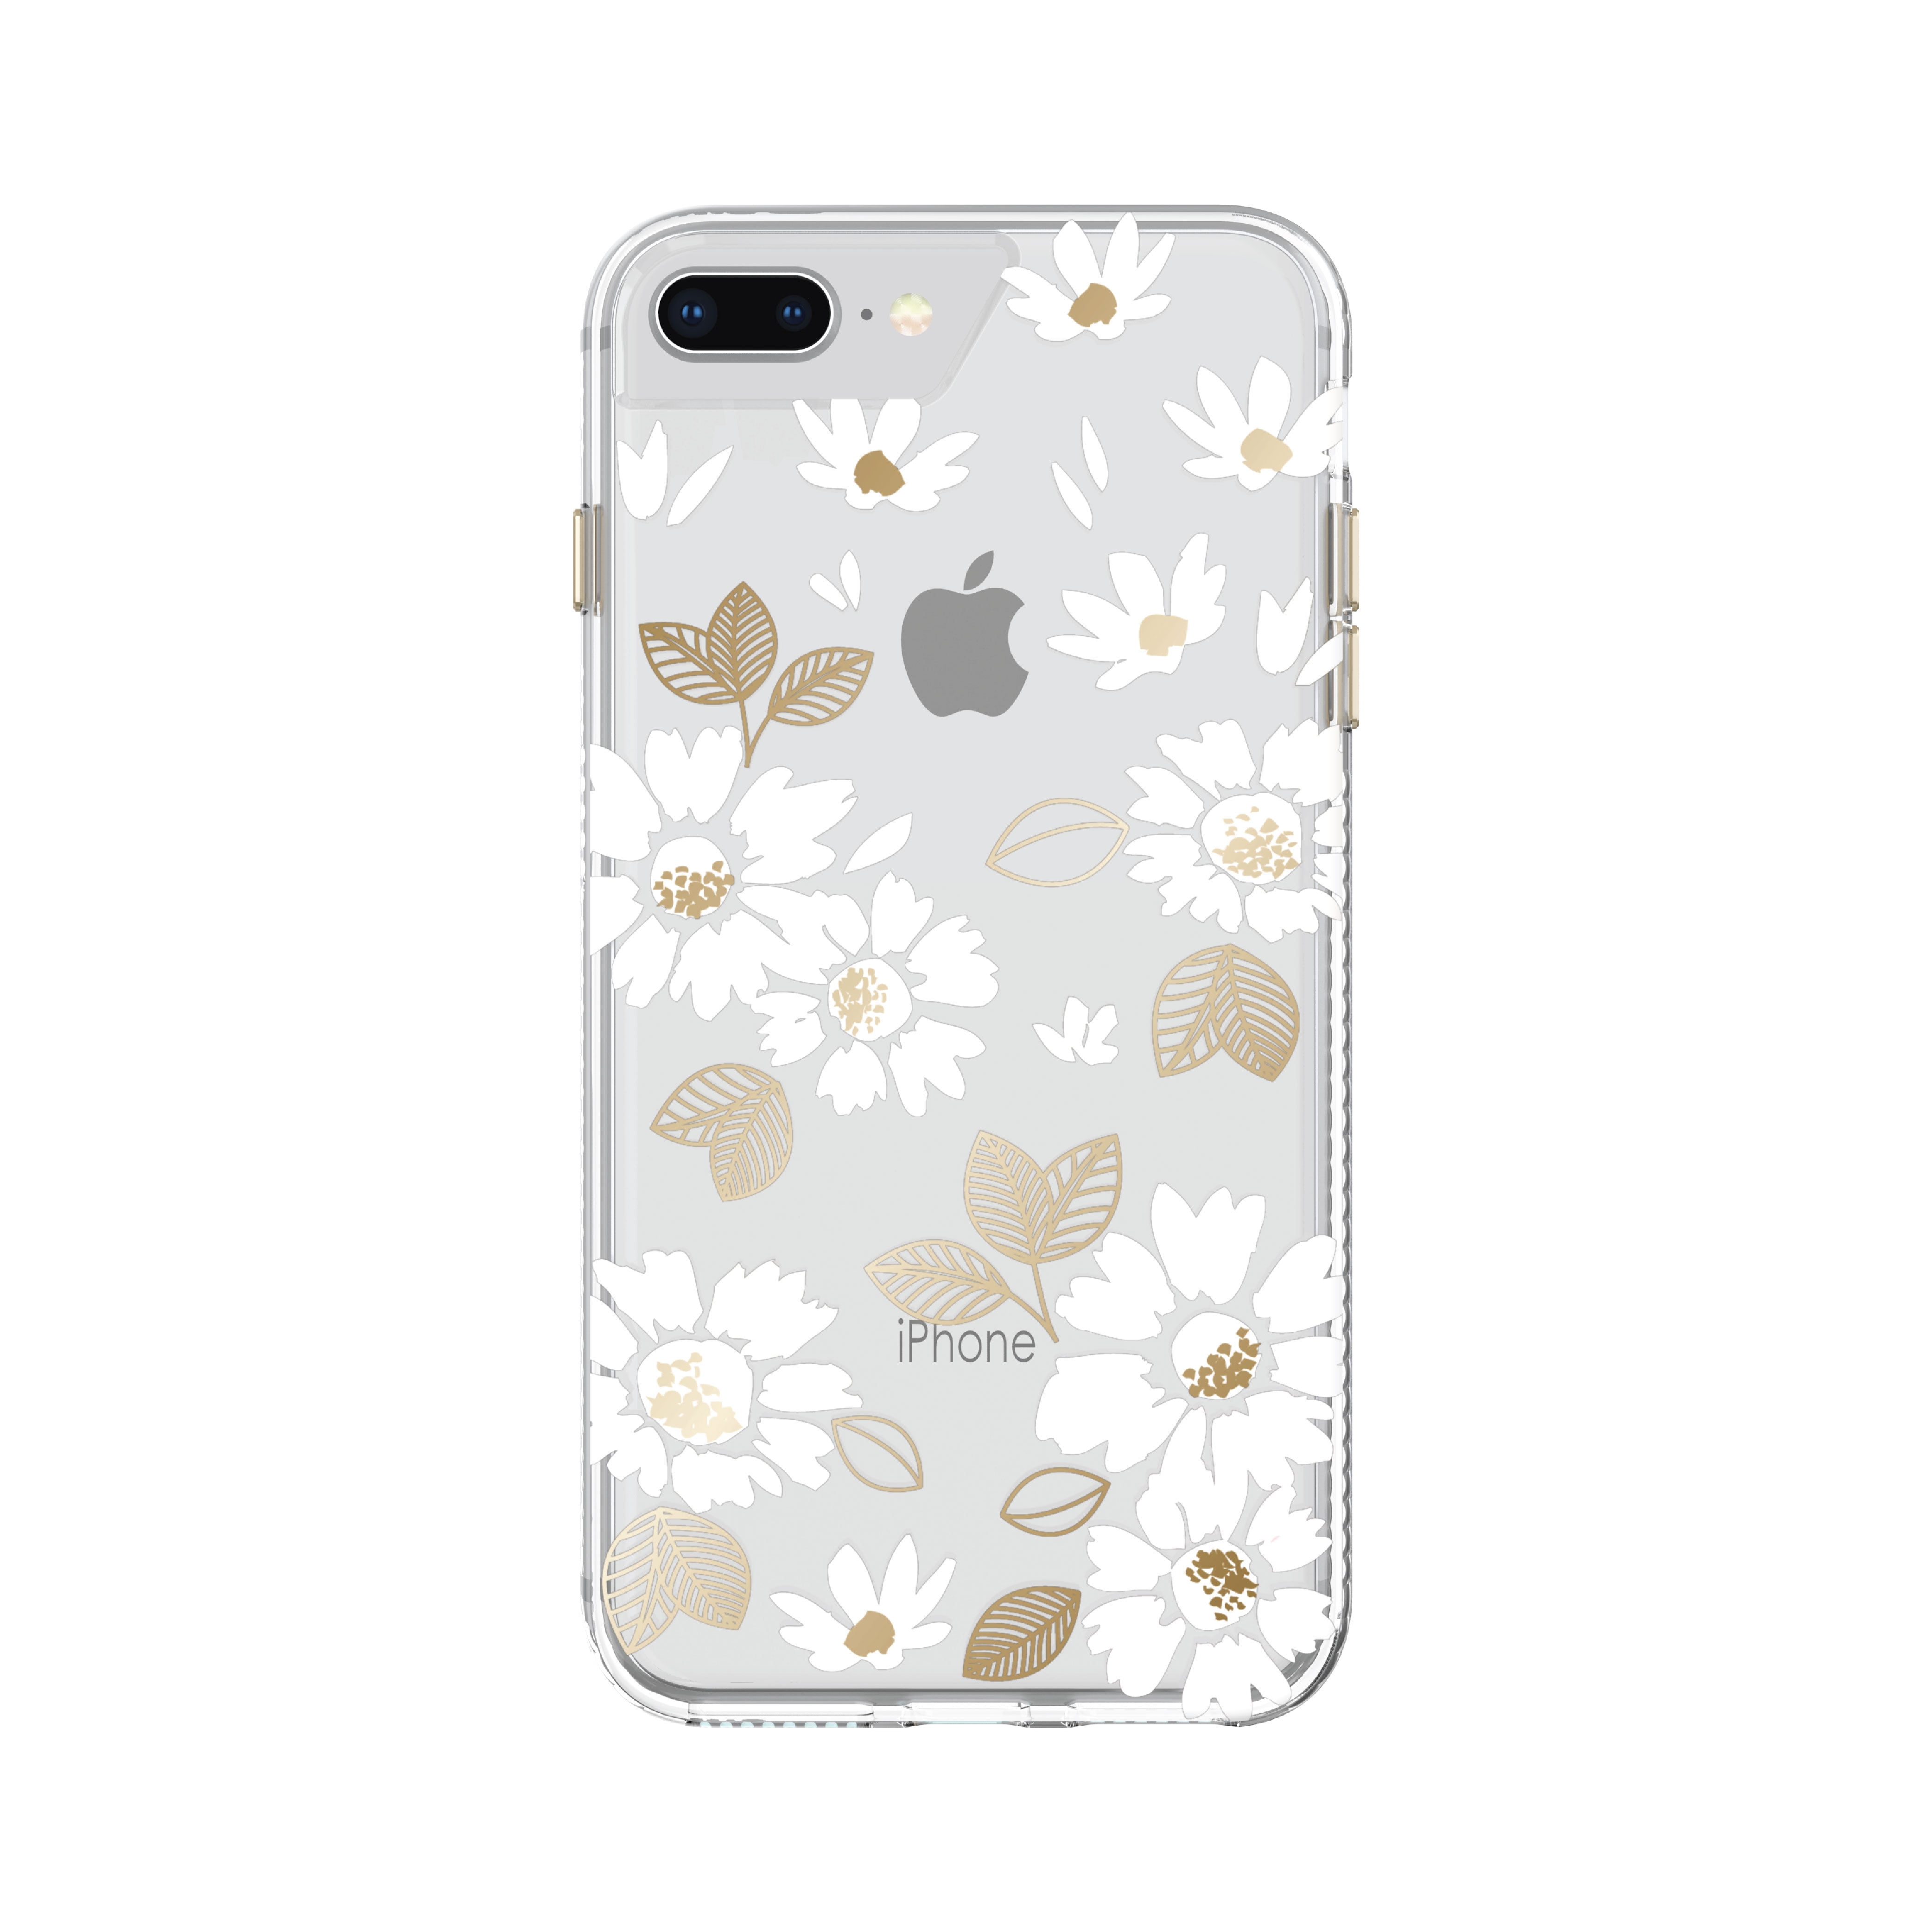 Beautiful Flowers Clear Handmade Design Clear Case For iphone 6 6s 7 8 Plus X Xr Xs Max 11 Pro Max Case Phone Cover